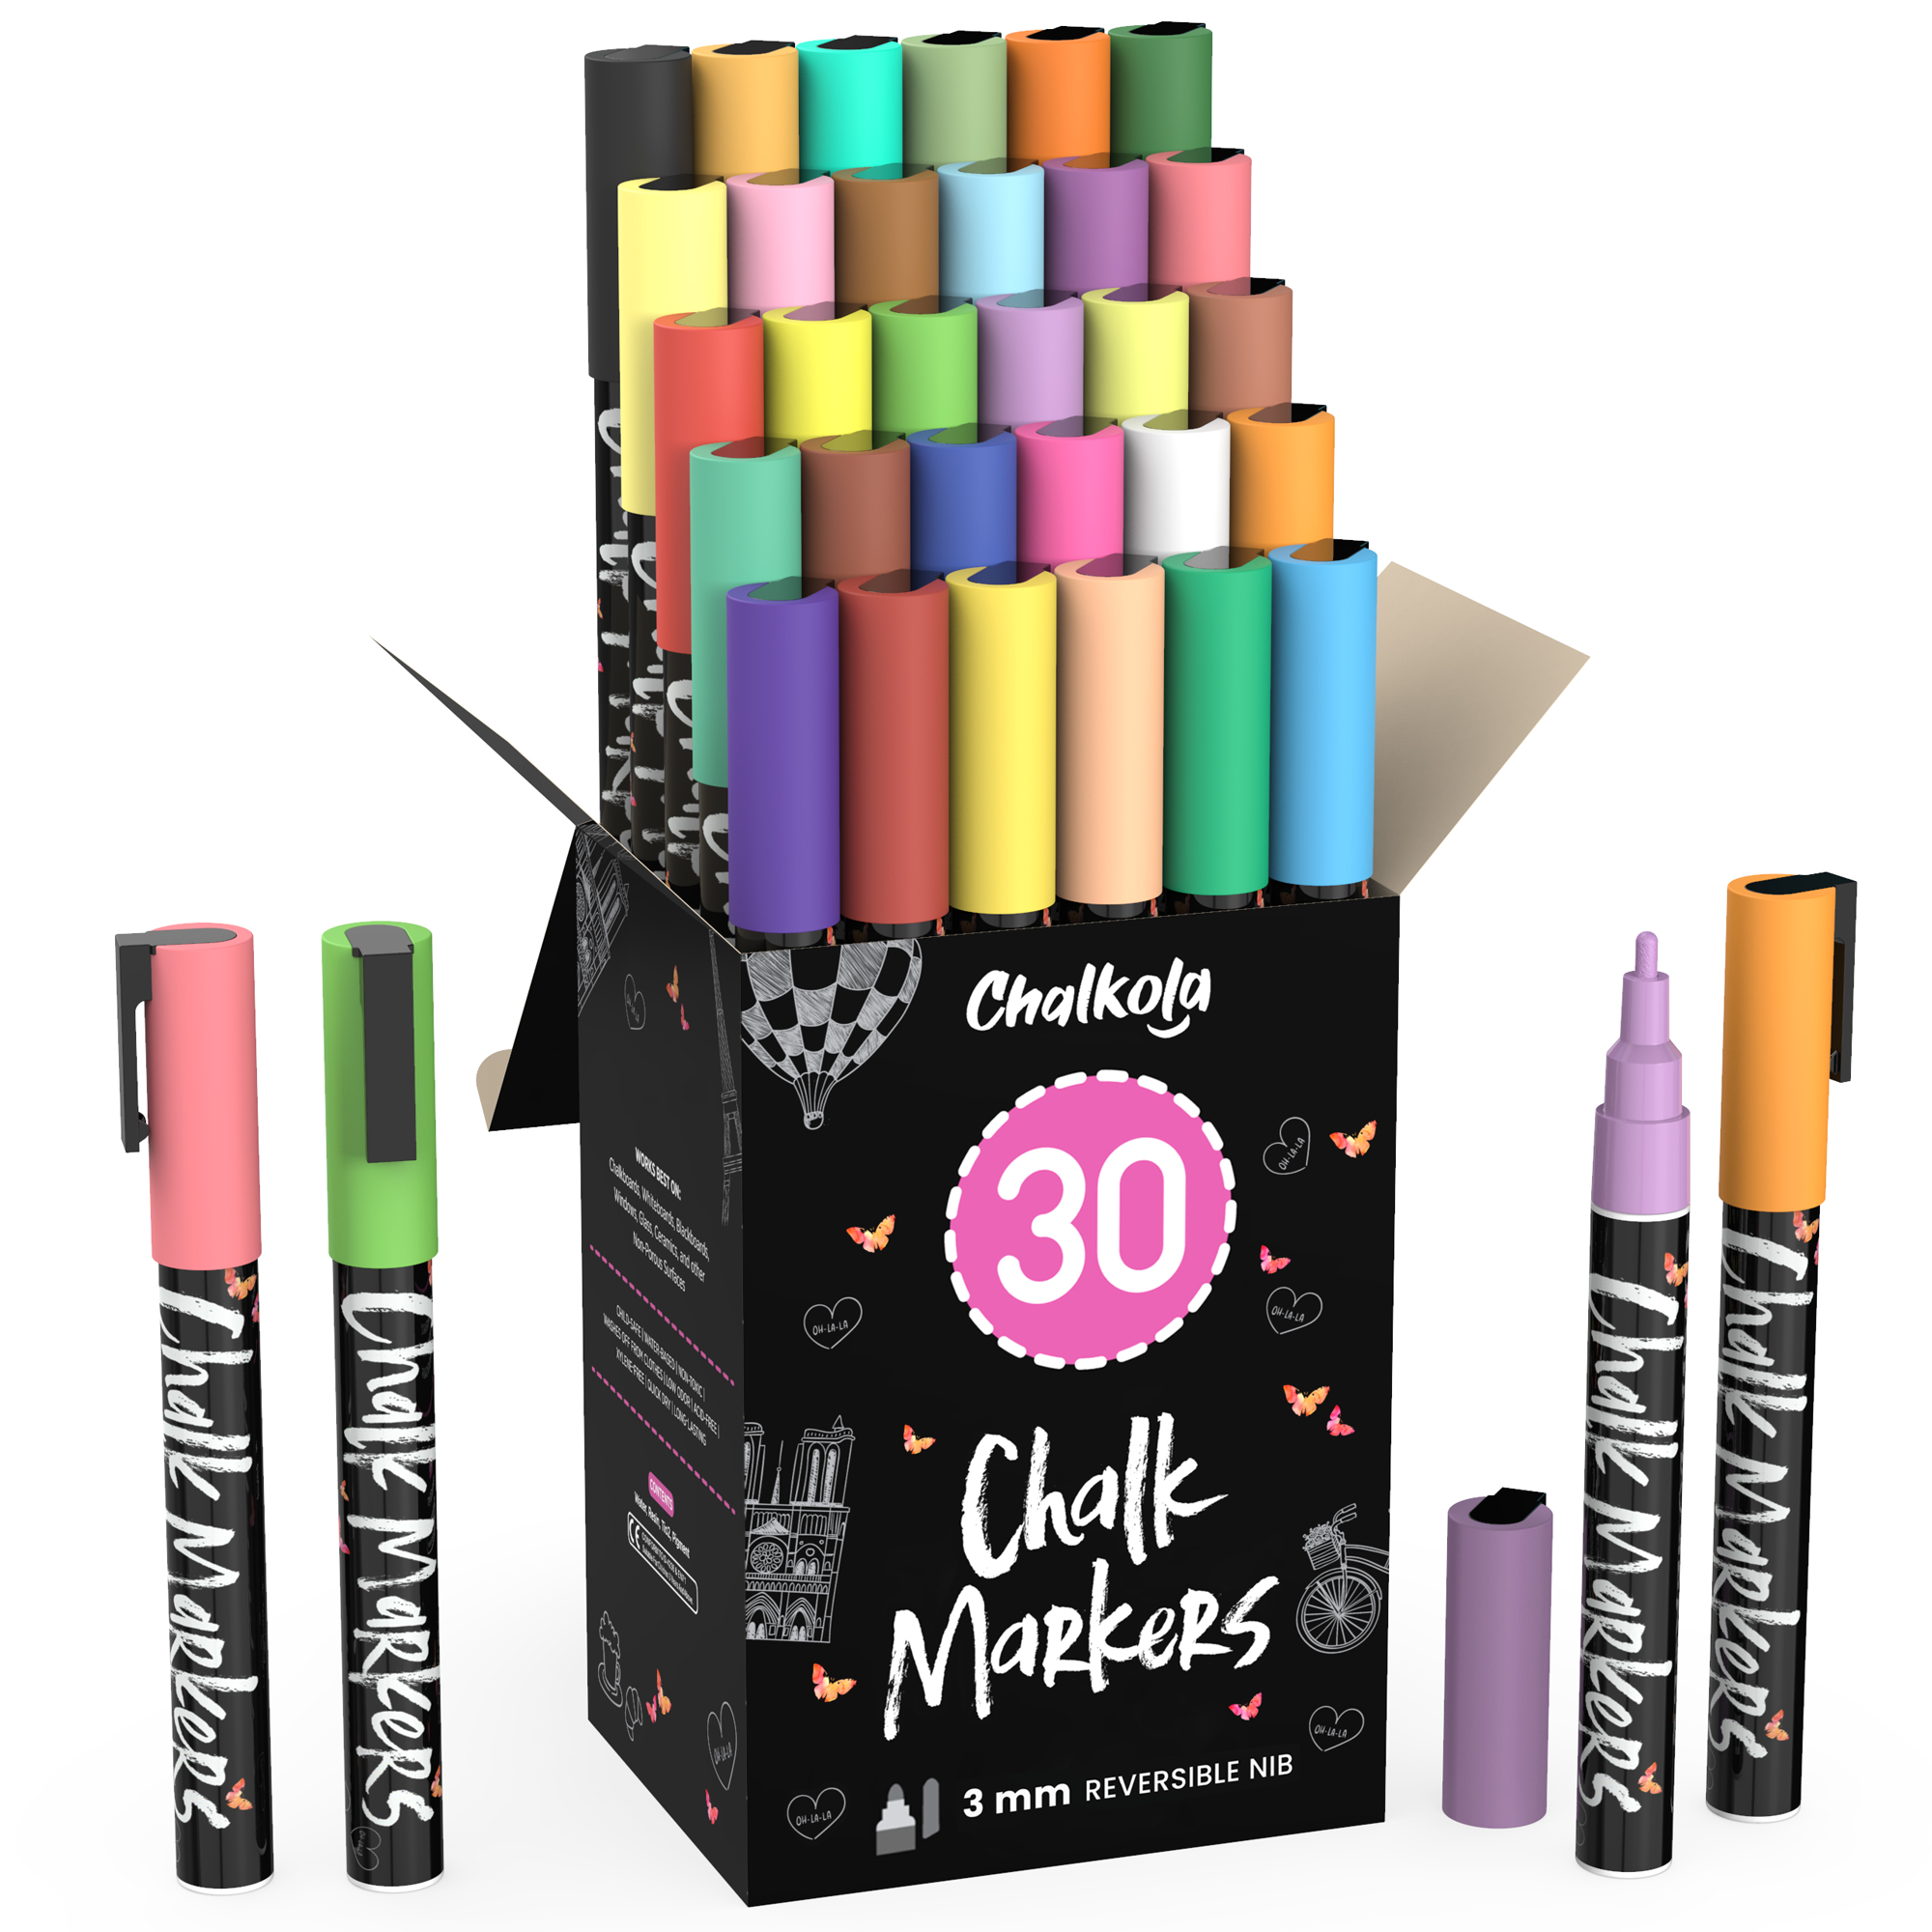 Chalkola Chalk Markers Review - 2 Peas and a Dog